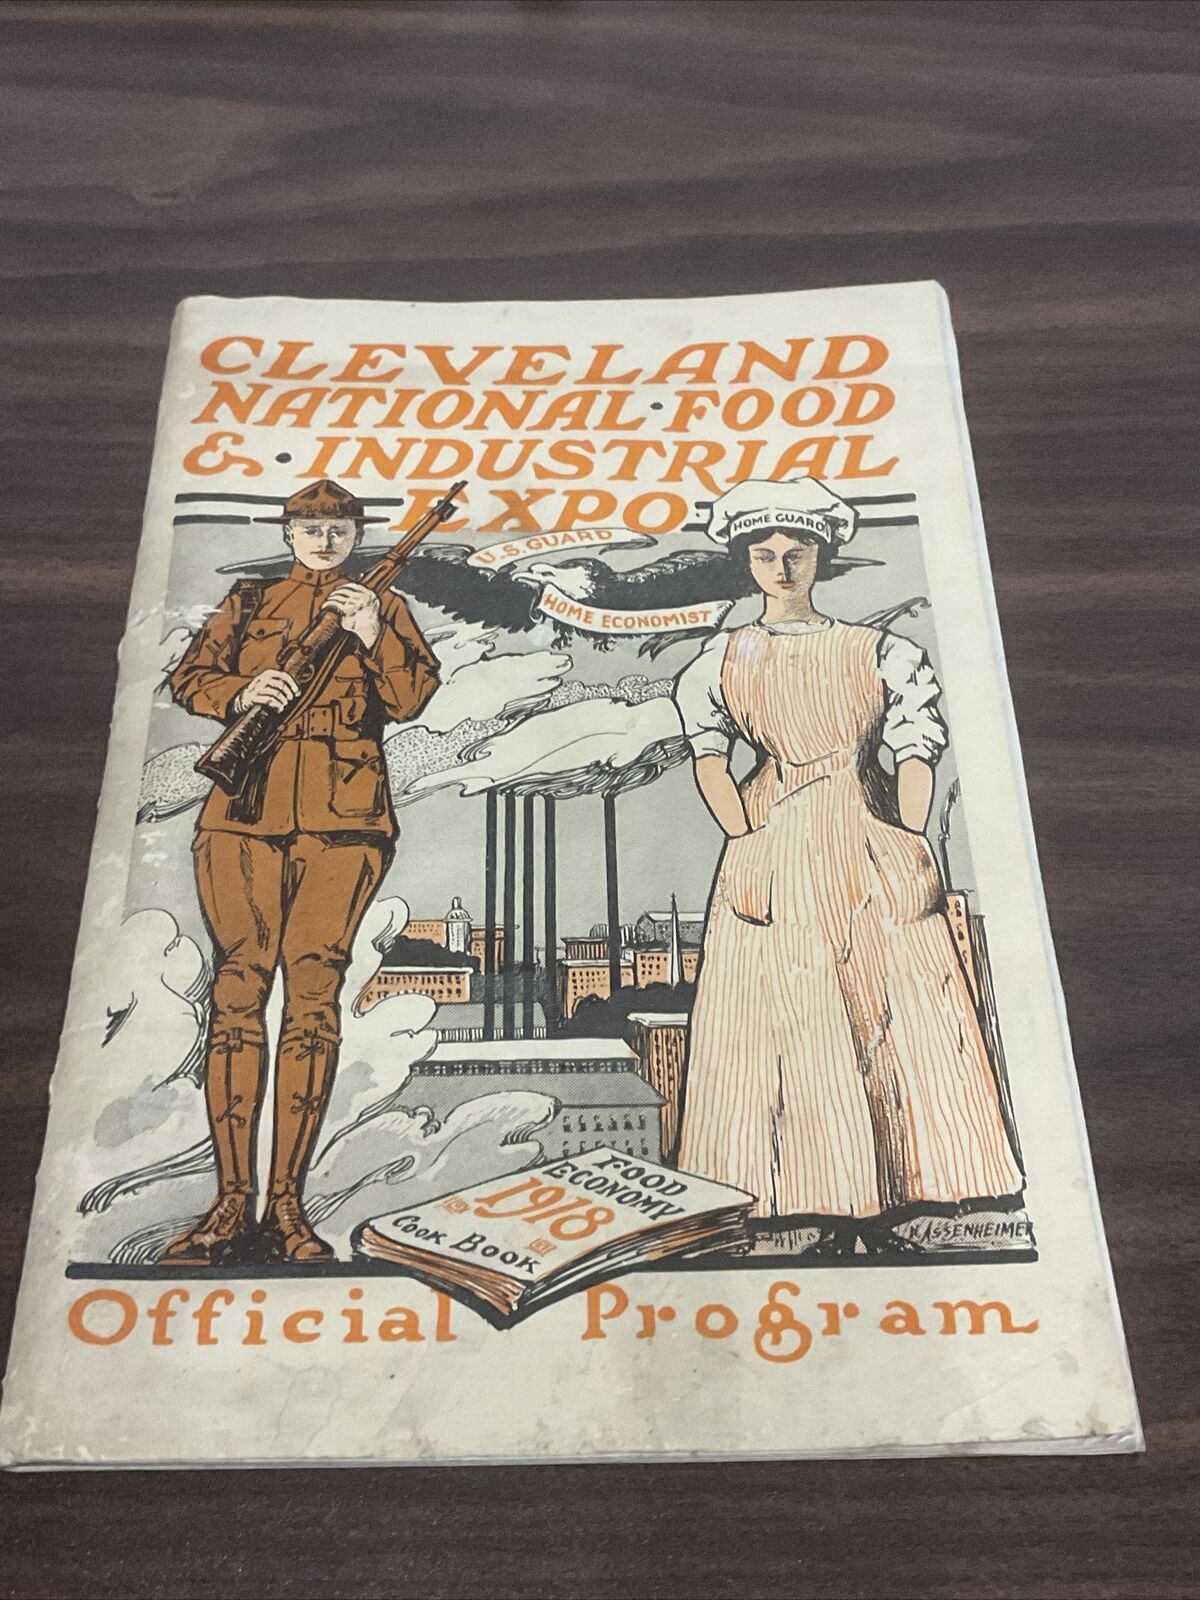 1918 Cleveland National Food & Industrial Expo Official Program Cookbook